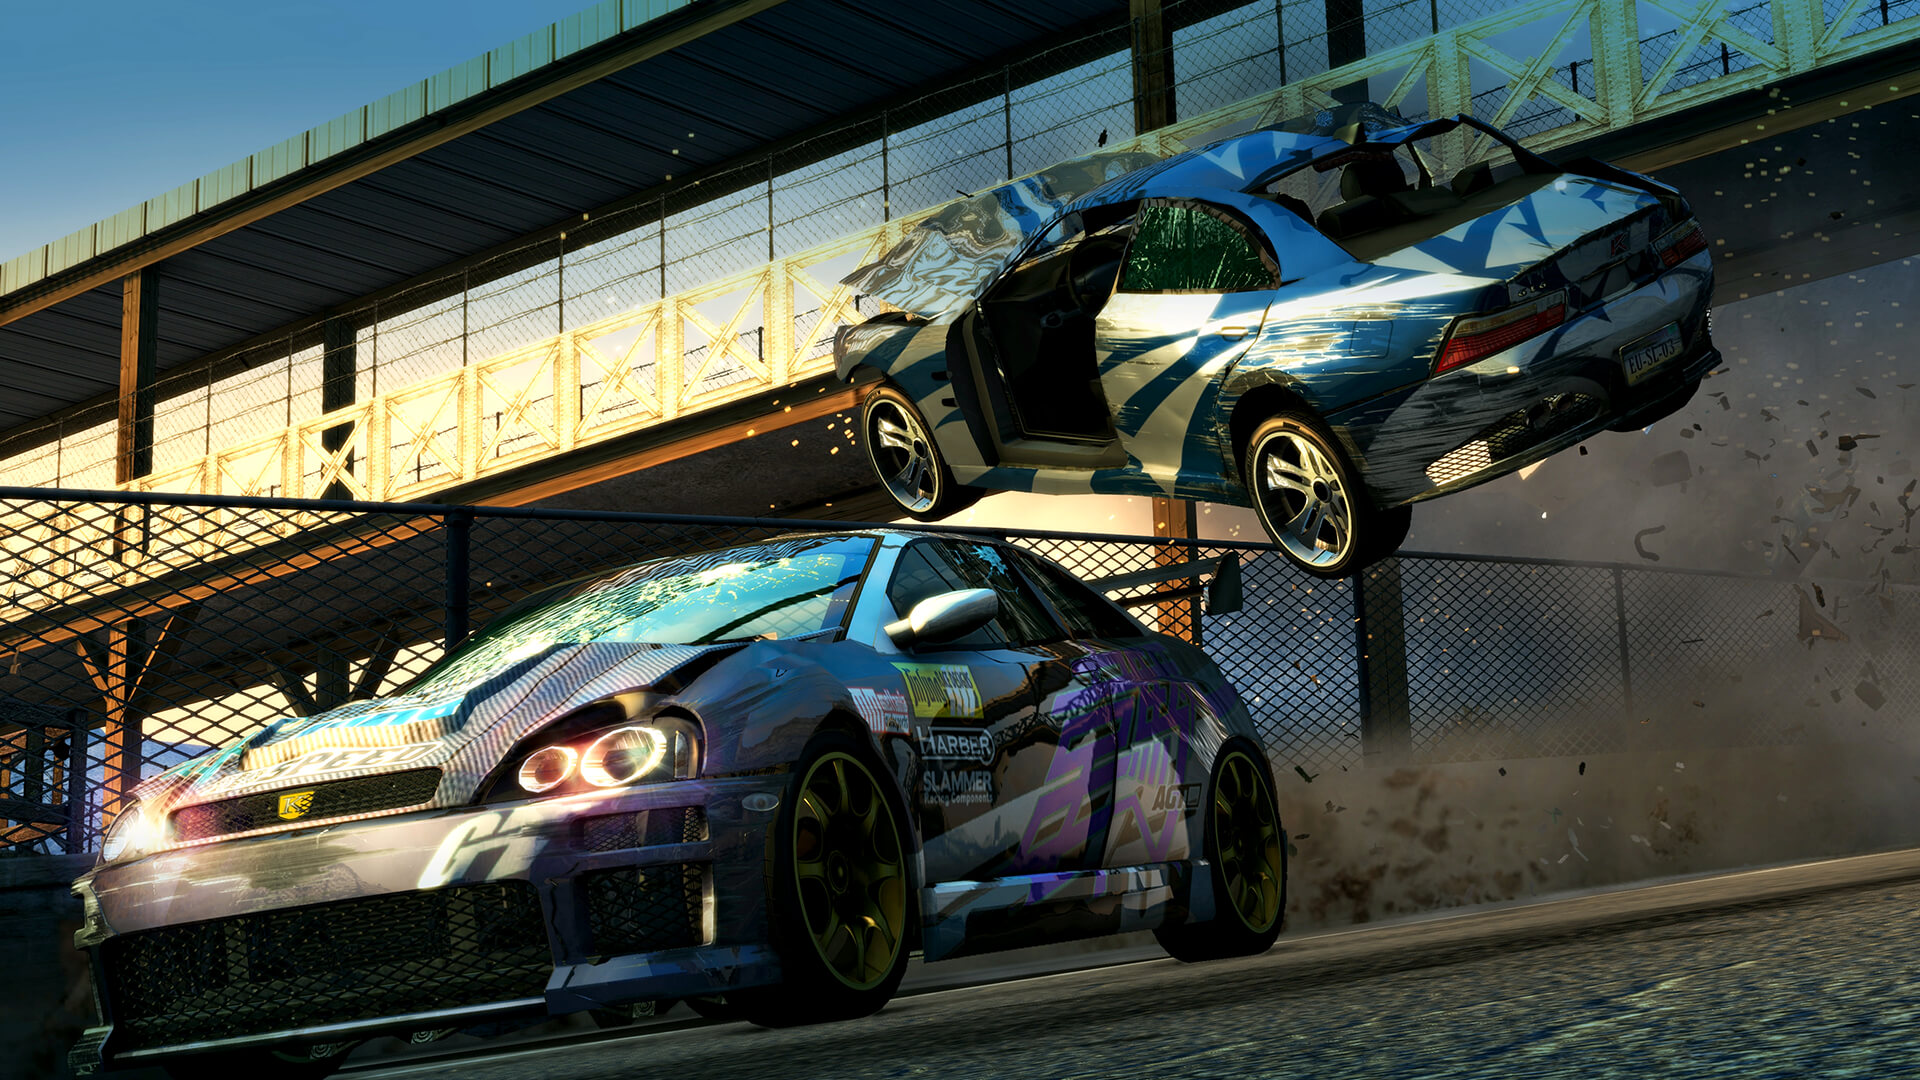 is burnout paradise multiplayer